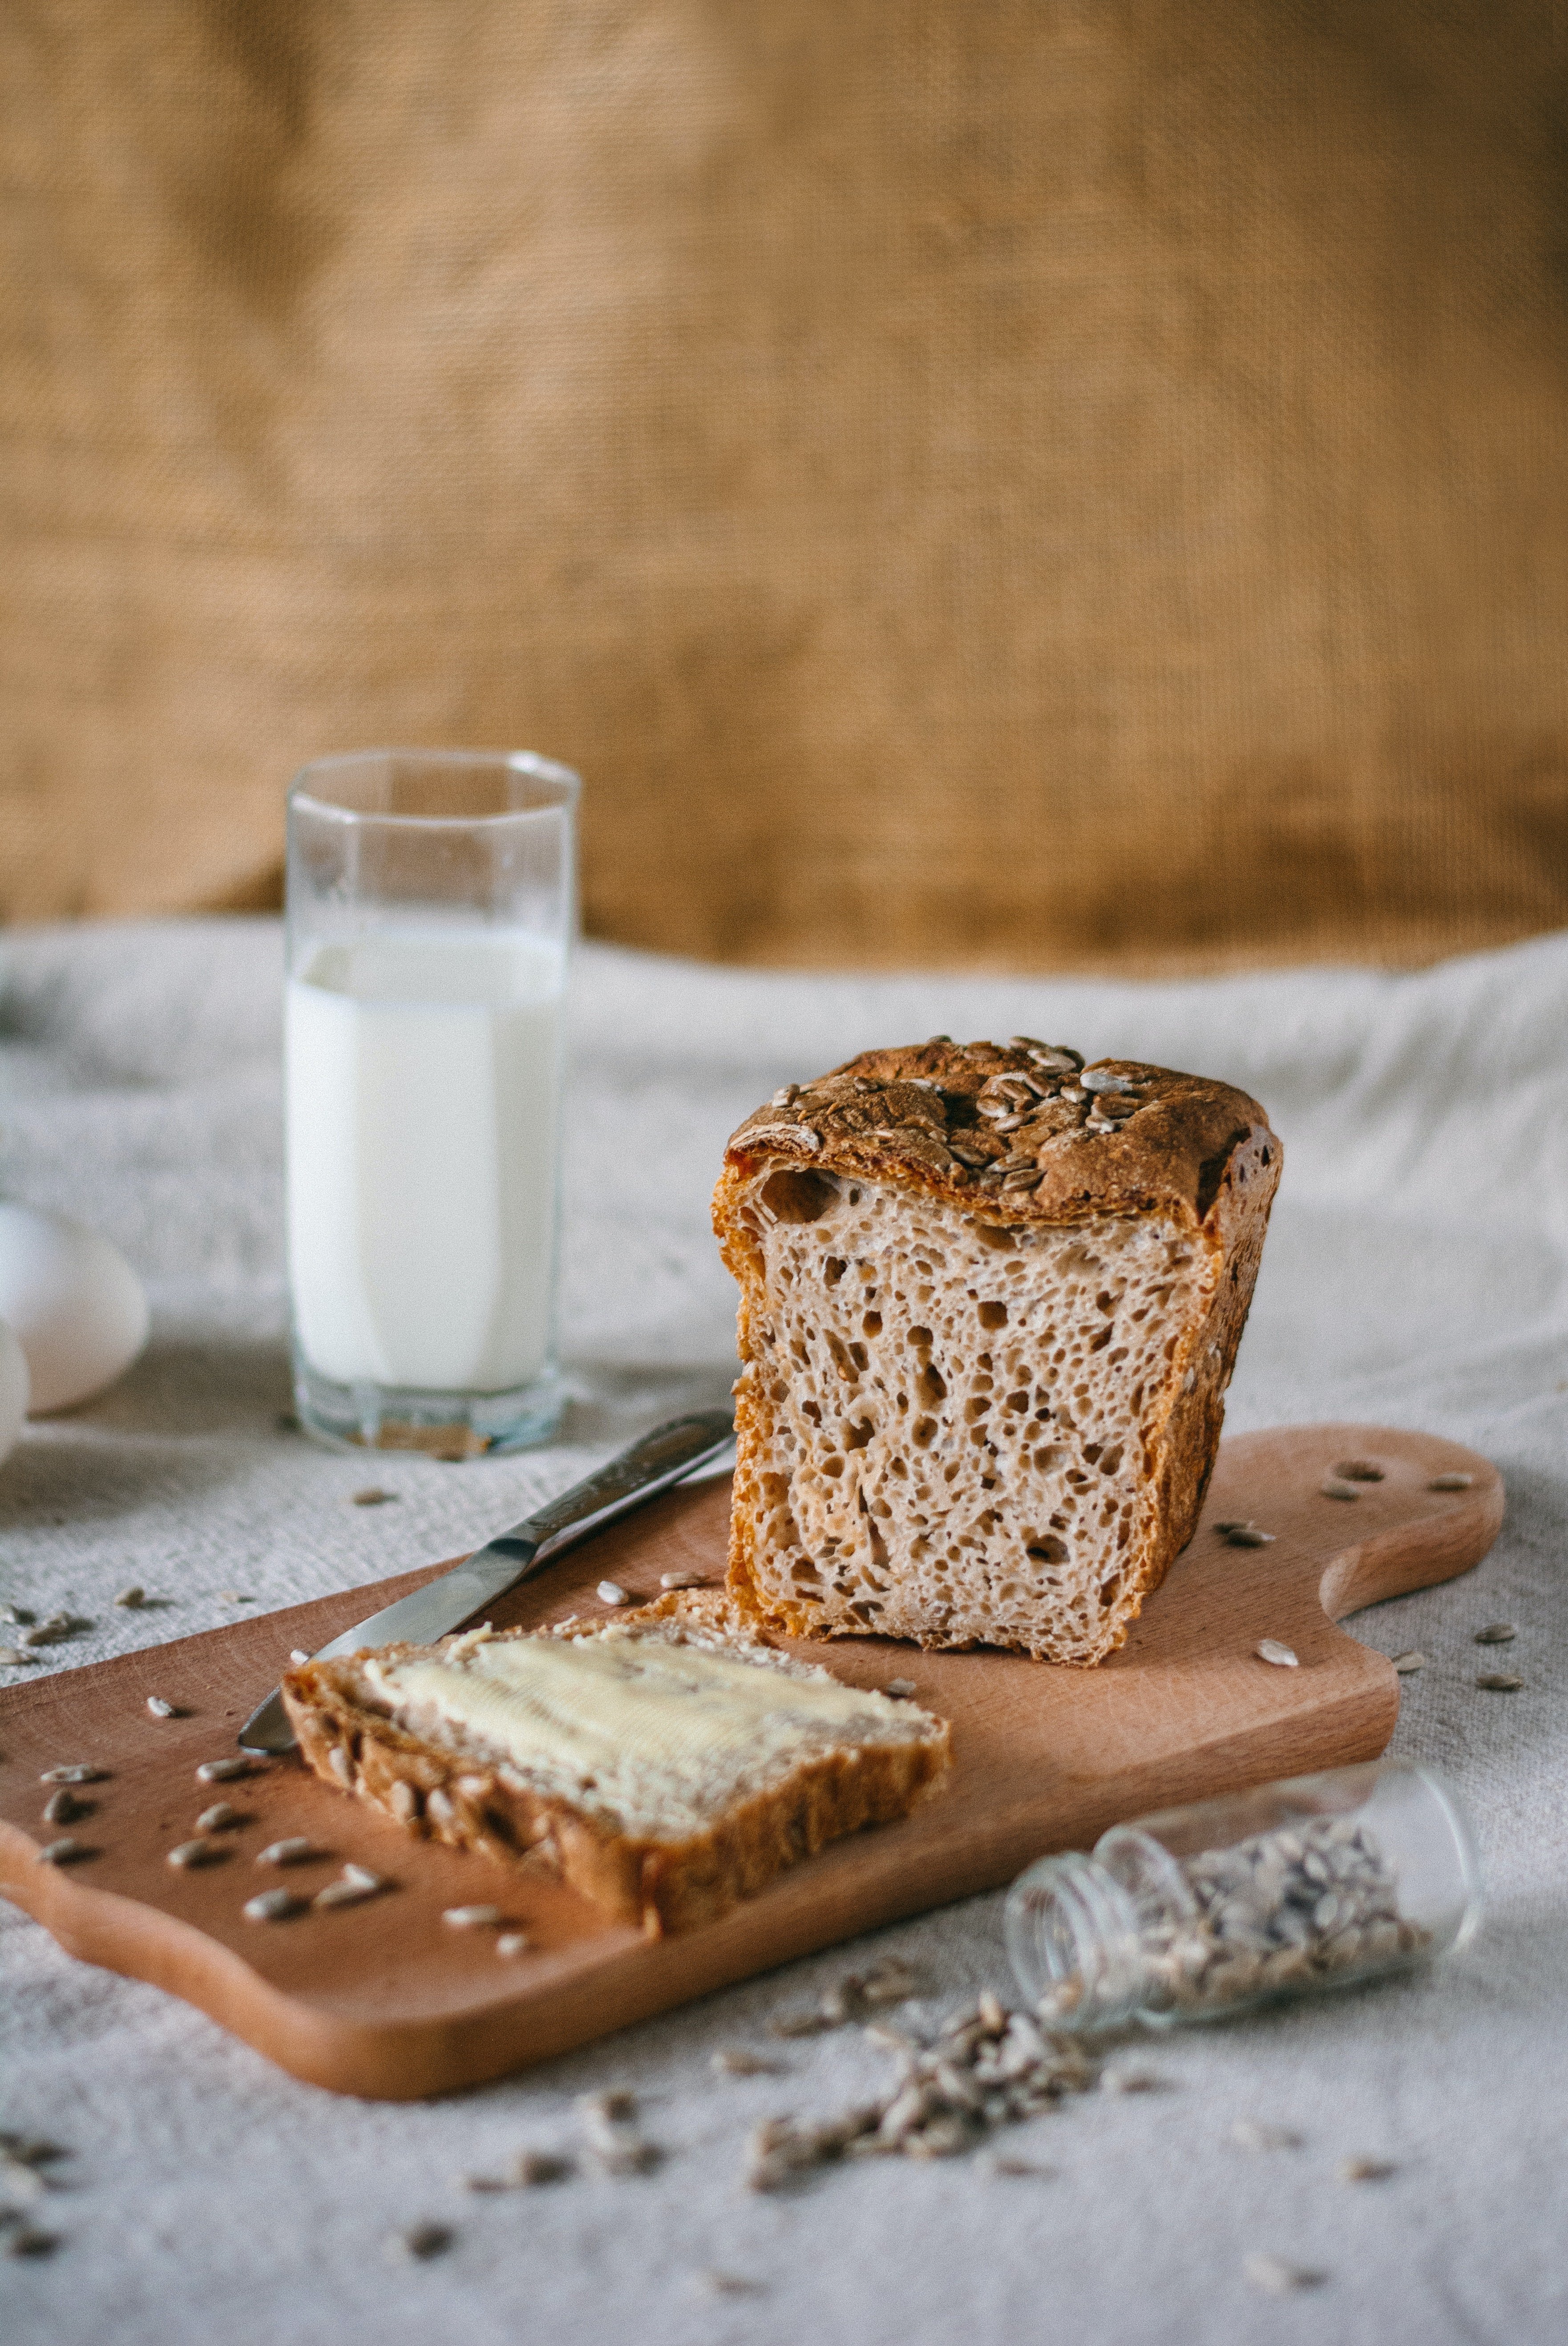 Lucy took some bread and milk for the homeless man. | Source: Pexels